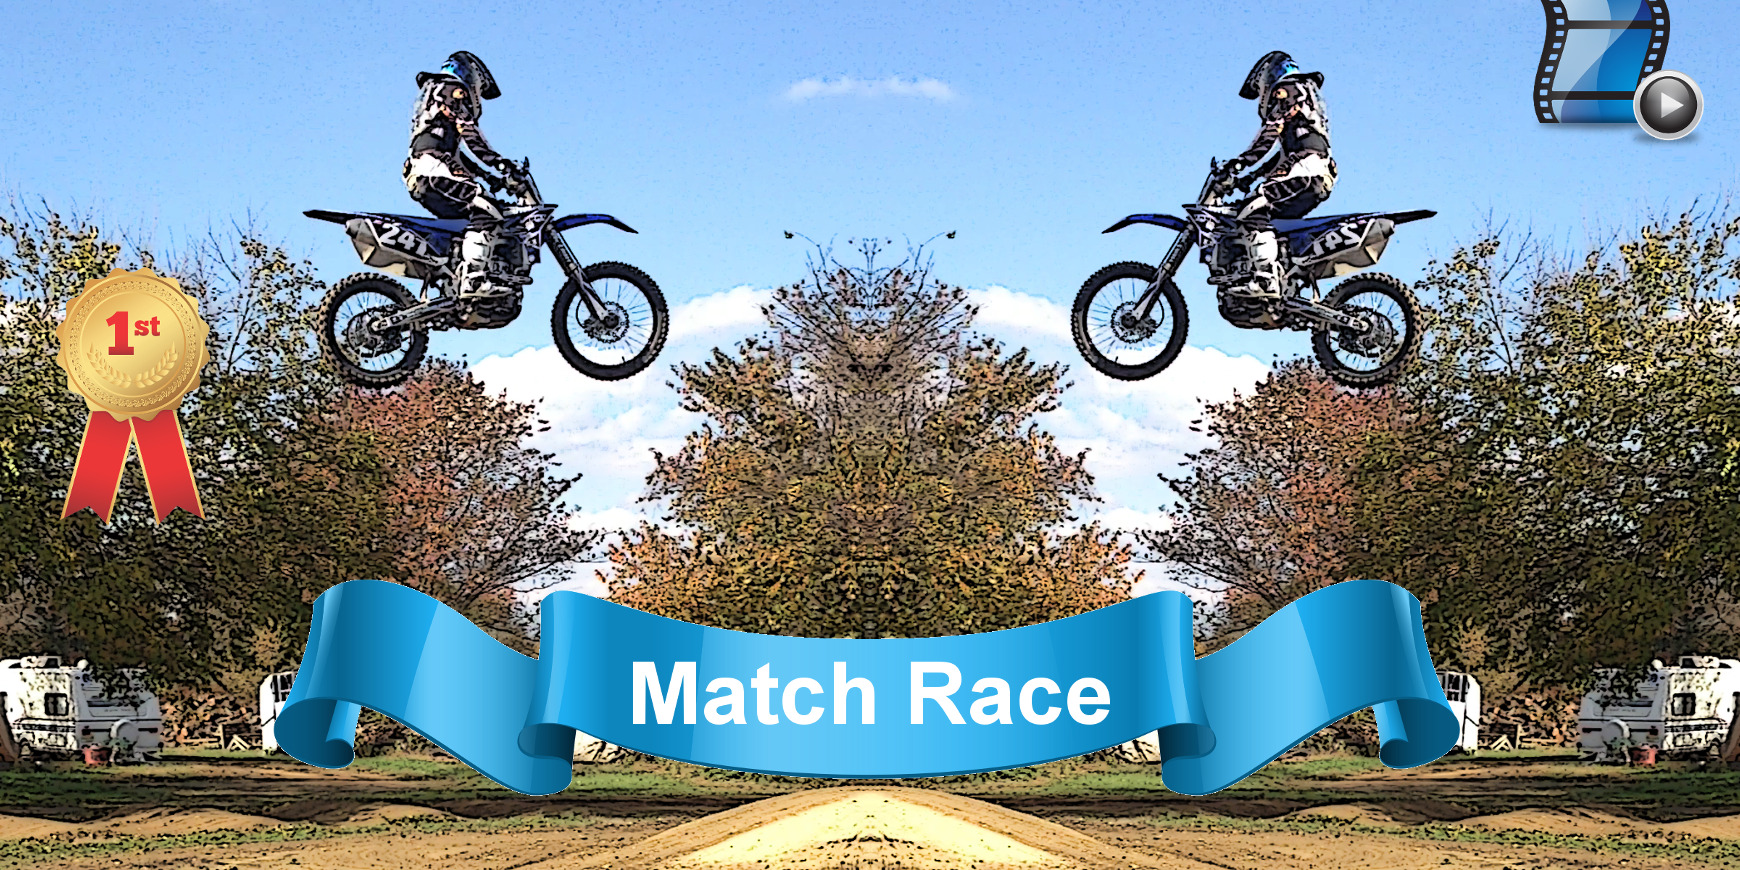 Match Race app for Motocross and all forms of racing